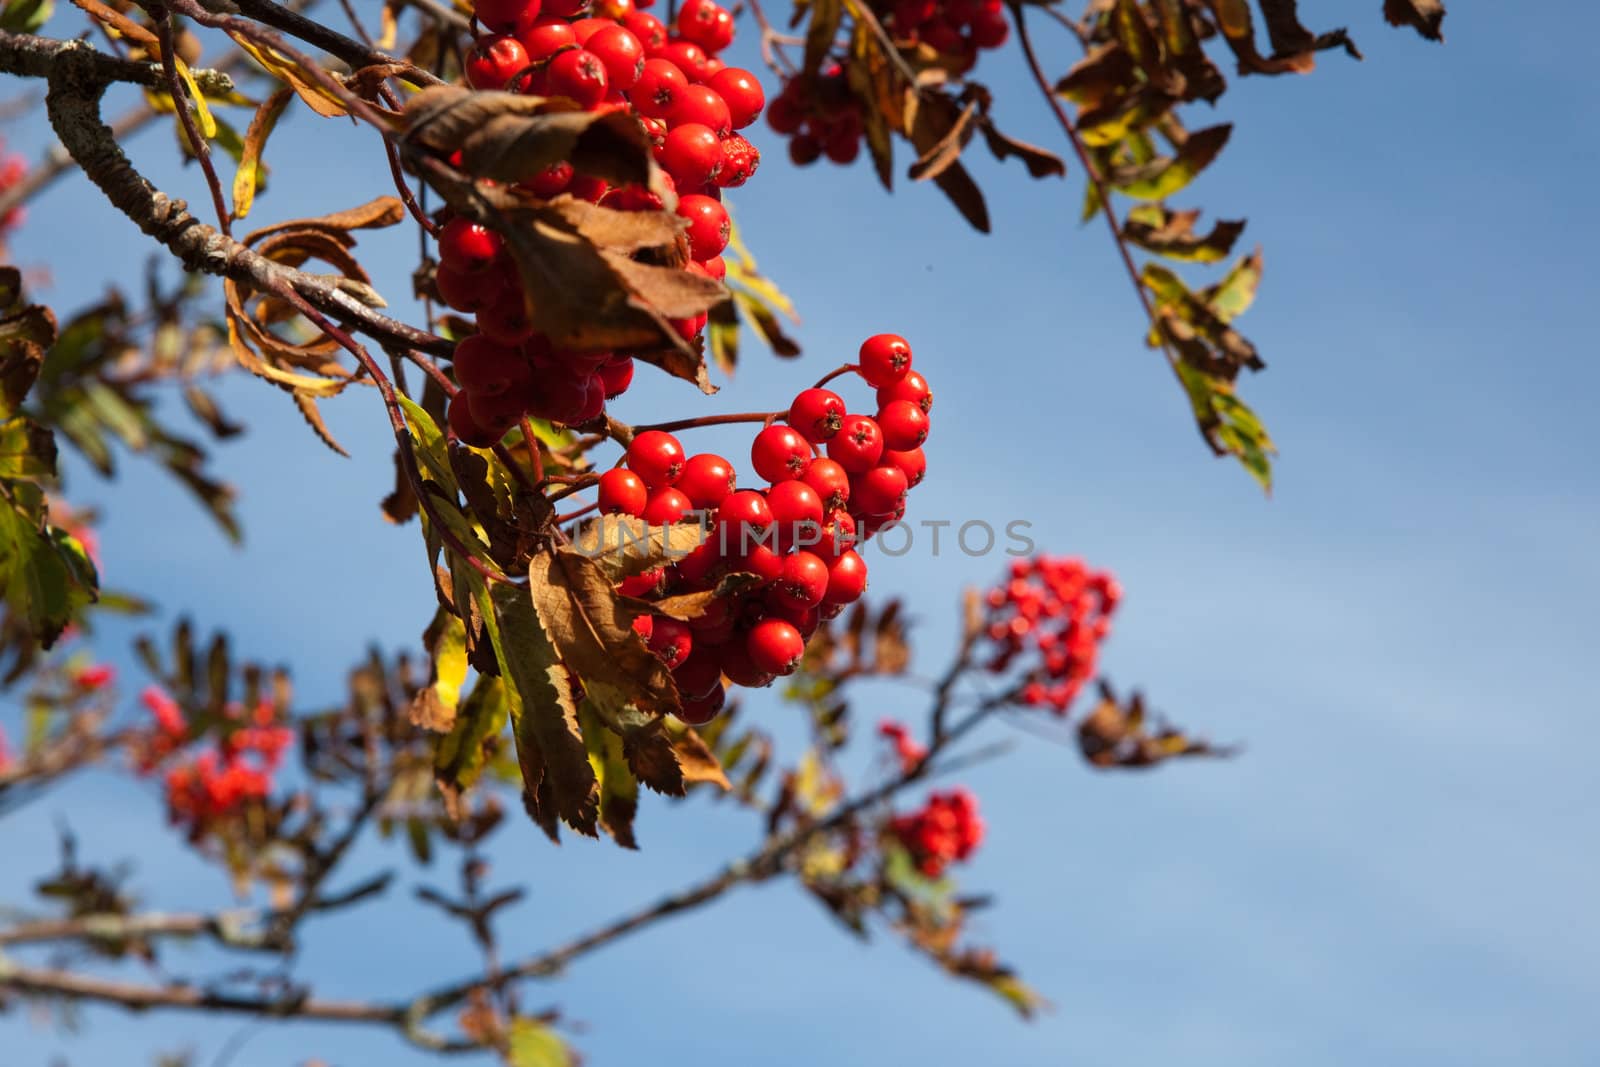 Rowanberry on a mountain ash in fall